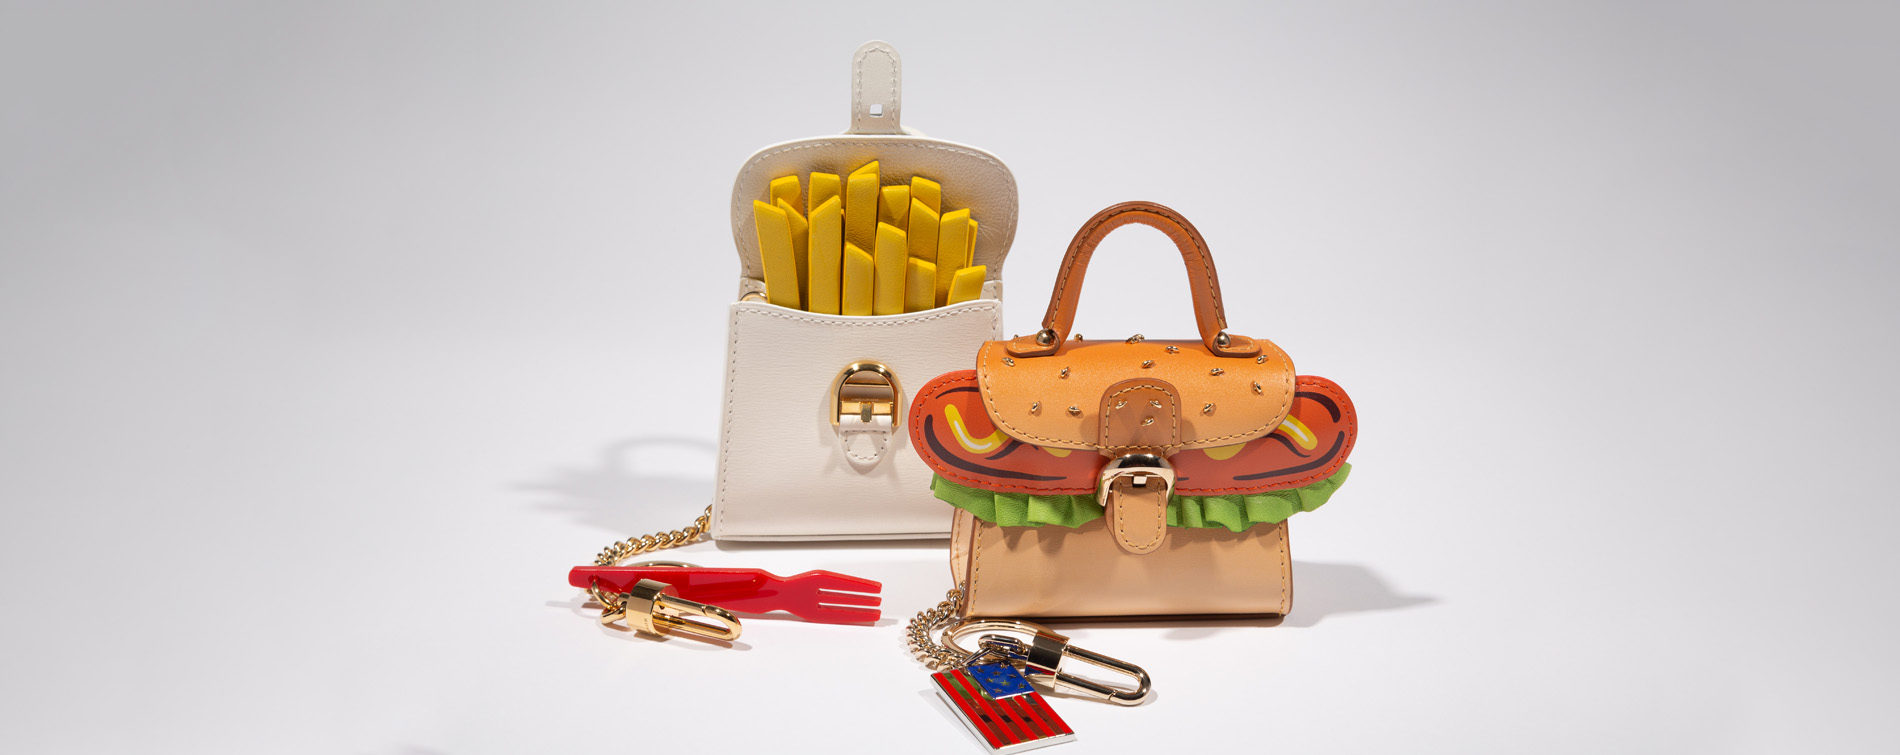 french fries purse and hot dog purse with fork and and american flag keychains